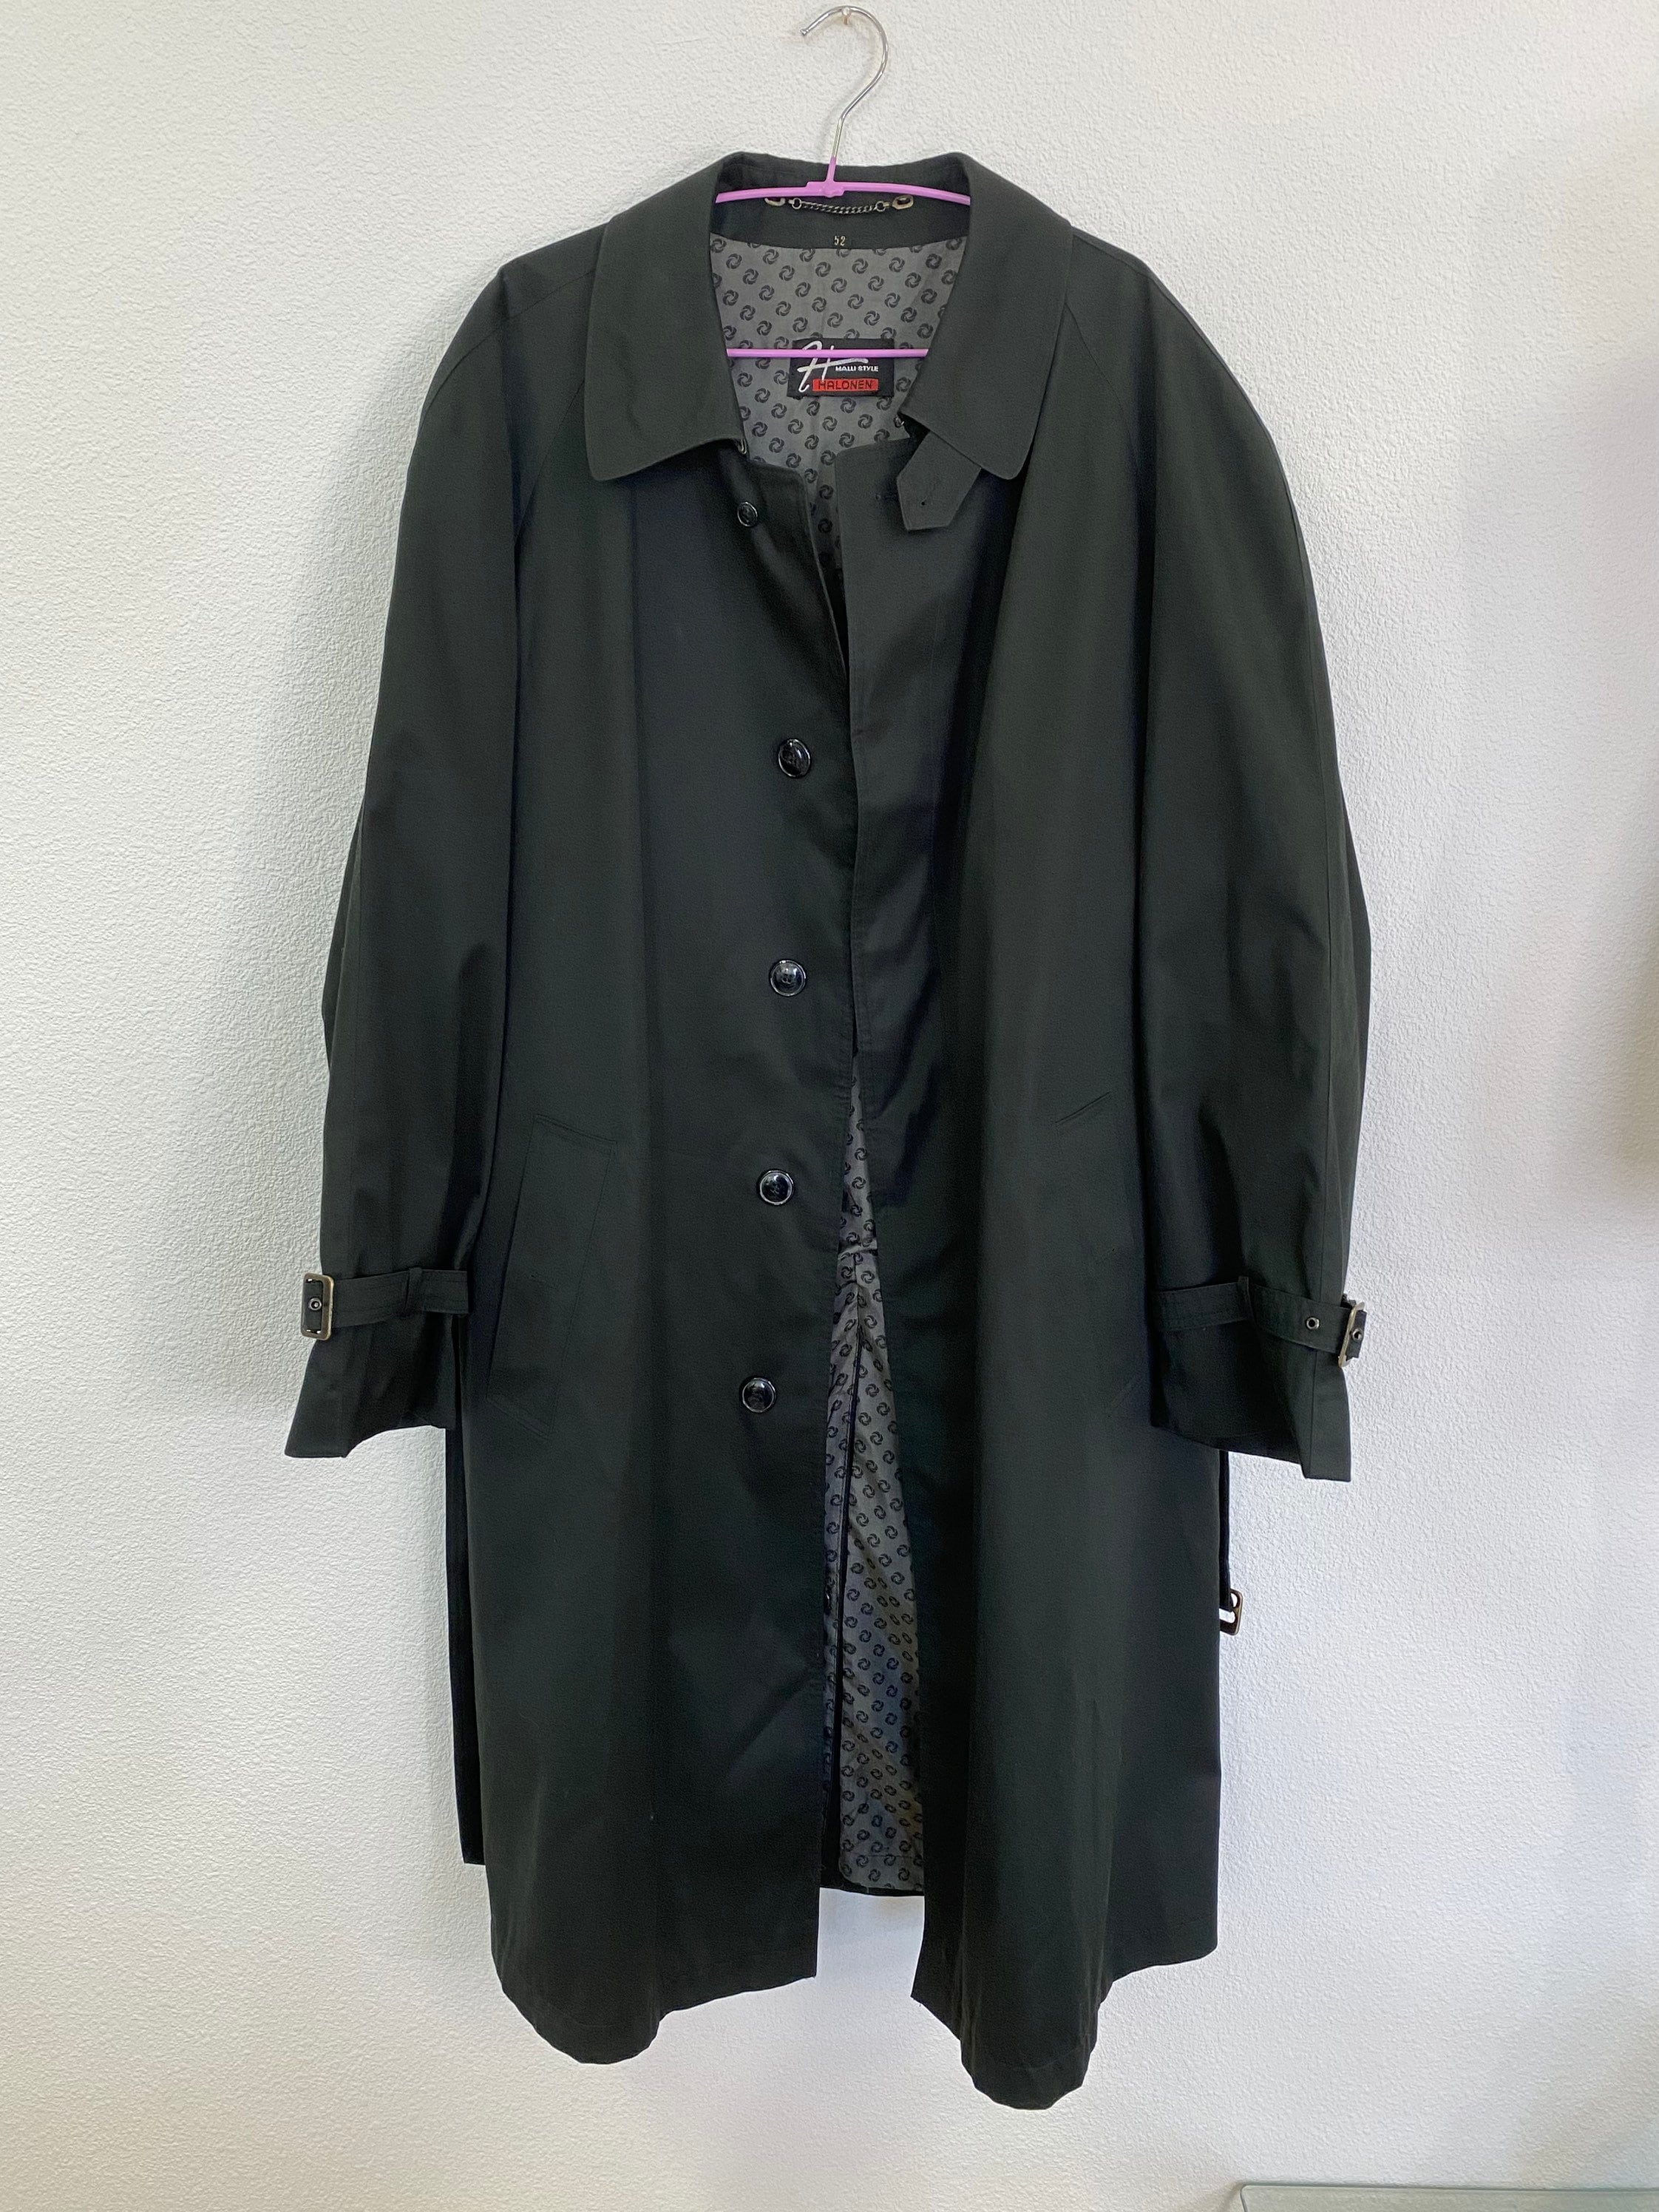 Vintage Mens Trench Coat Classic Size 52 - Etsy